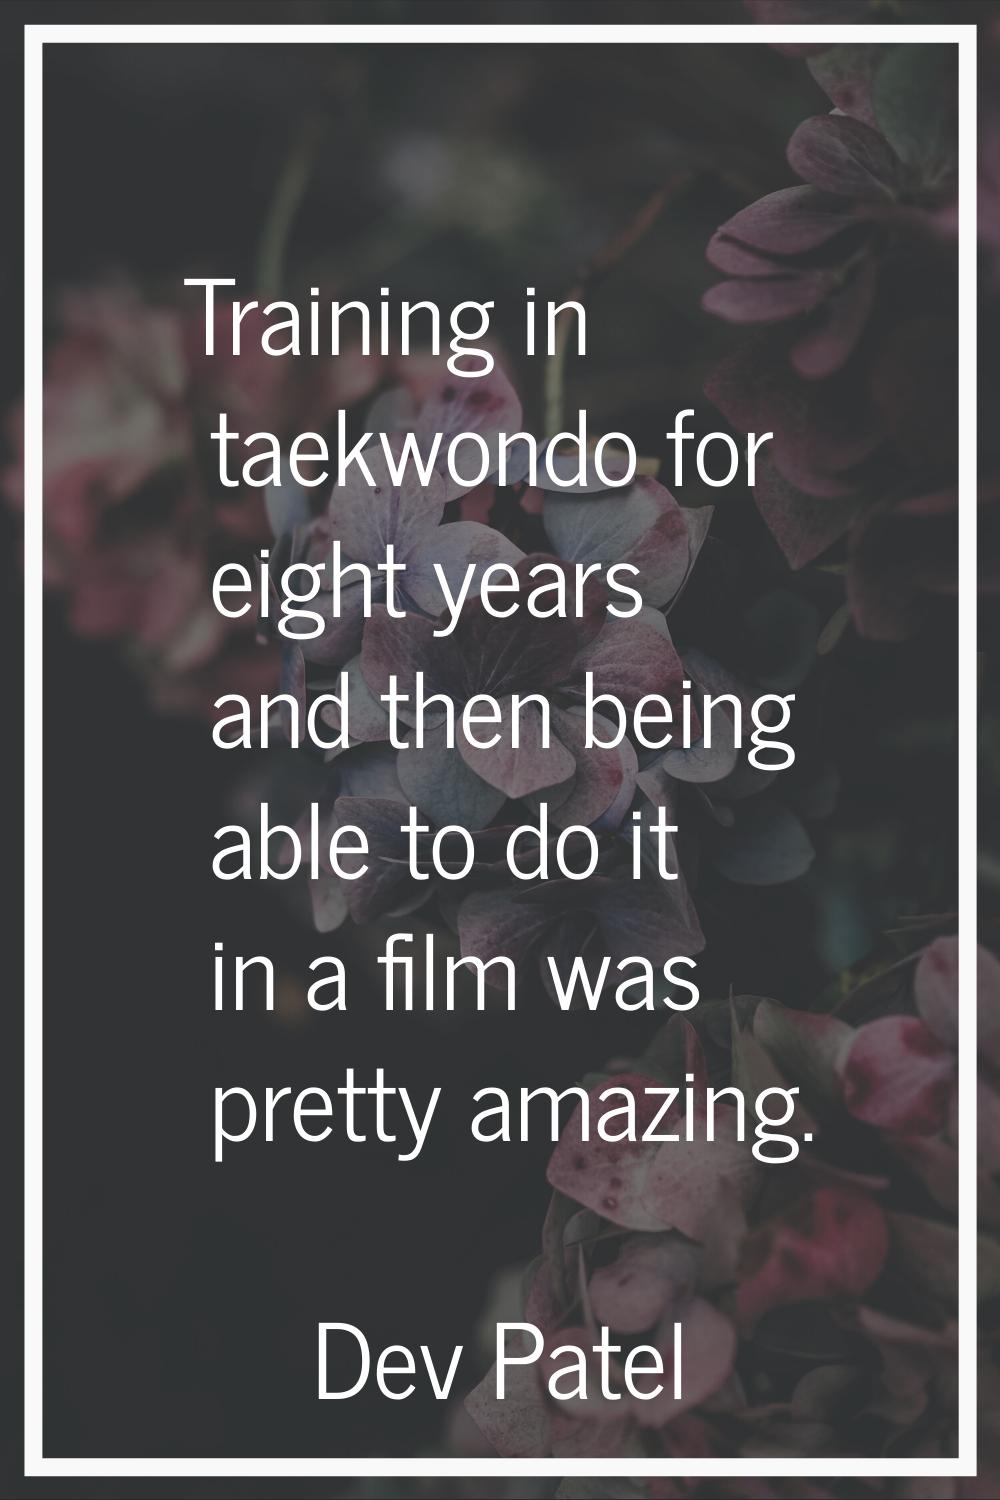 Training in taekwondo for eight years and then being able to do it in a film was pretty amazing.